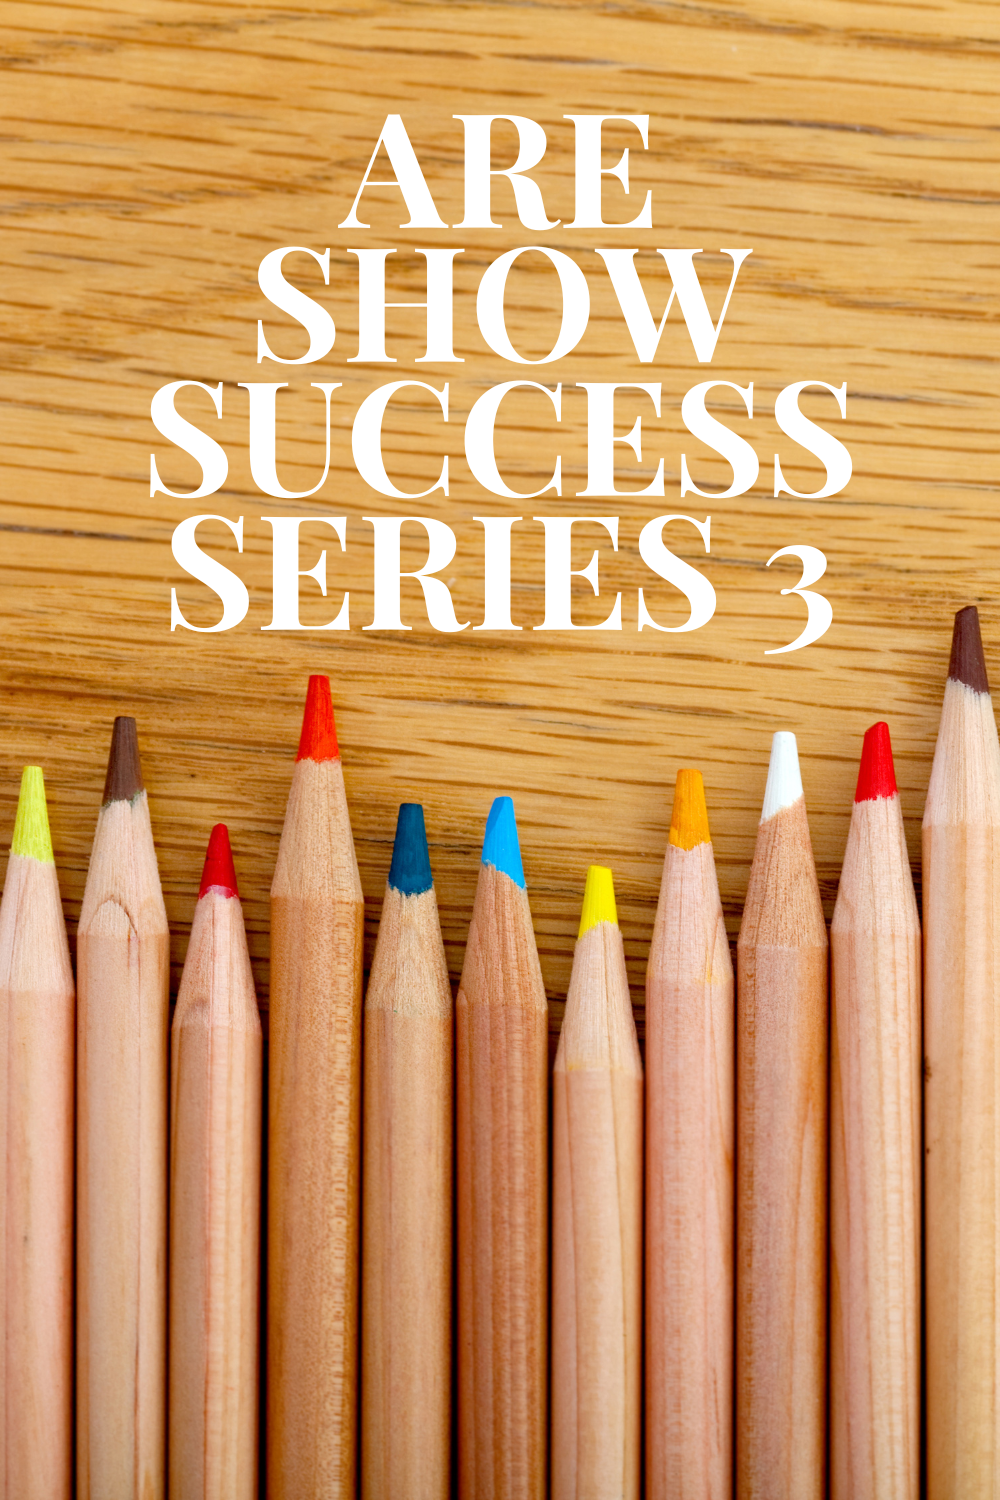 You are currently viewing Are Show Success Series 3